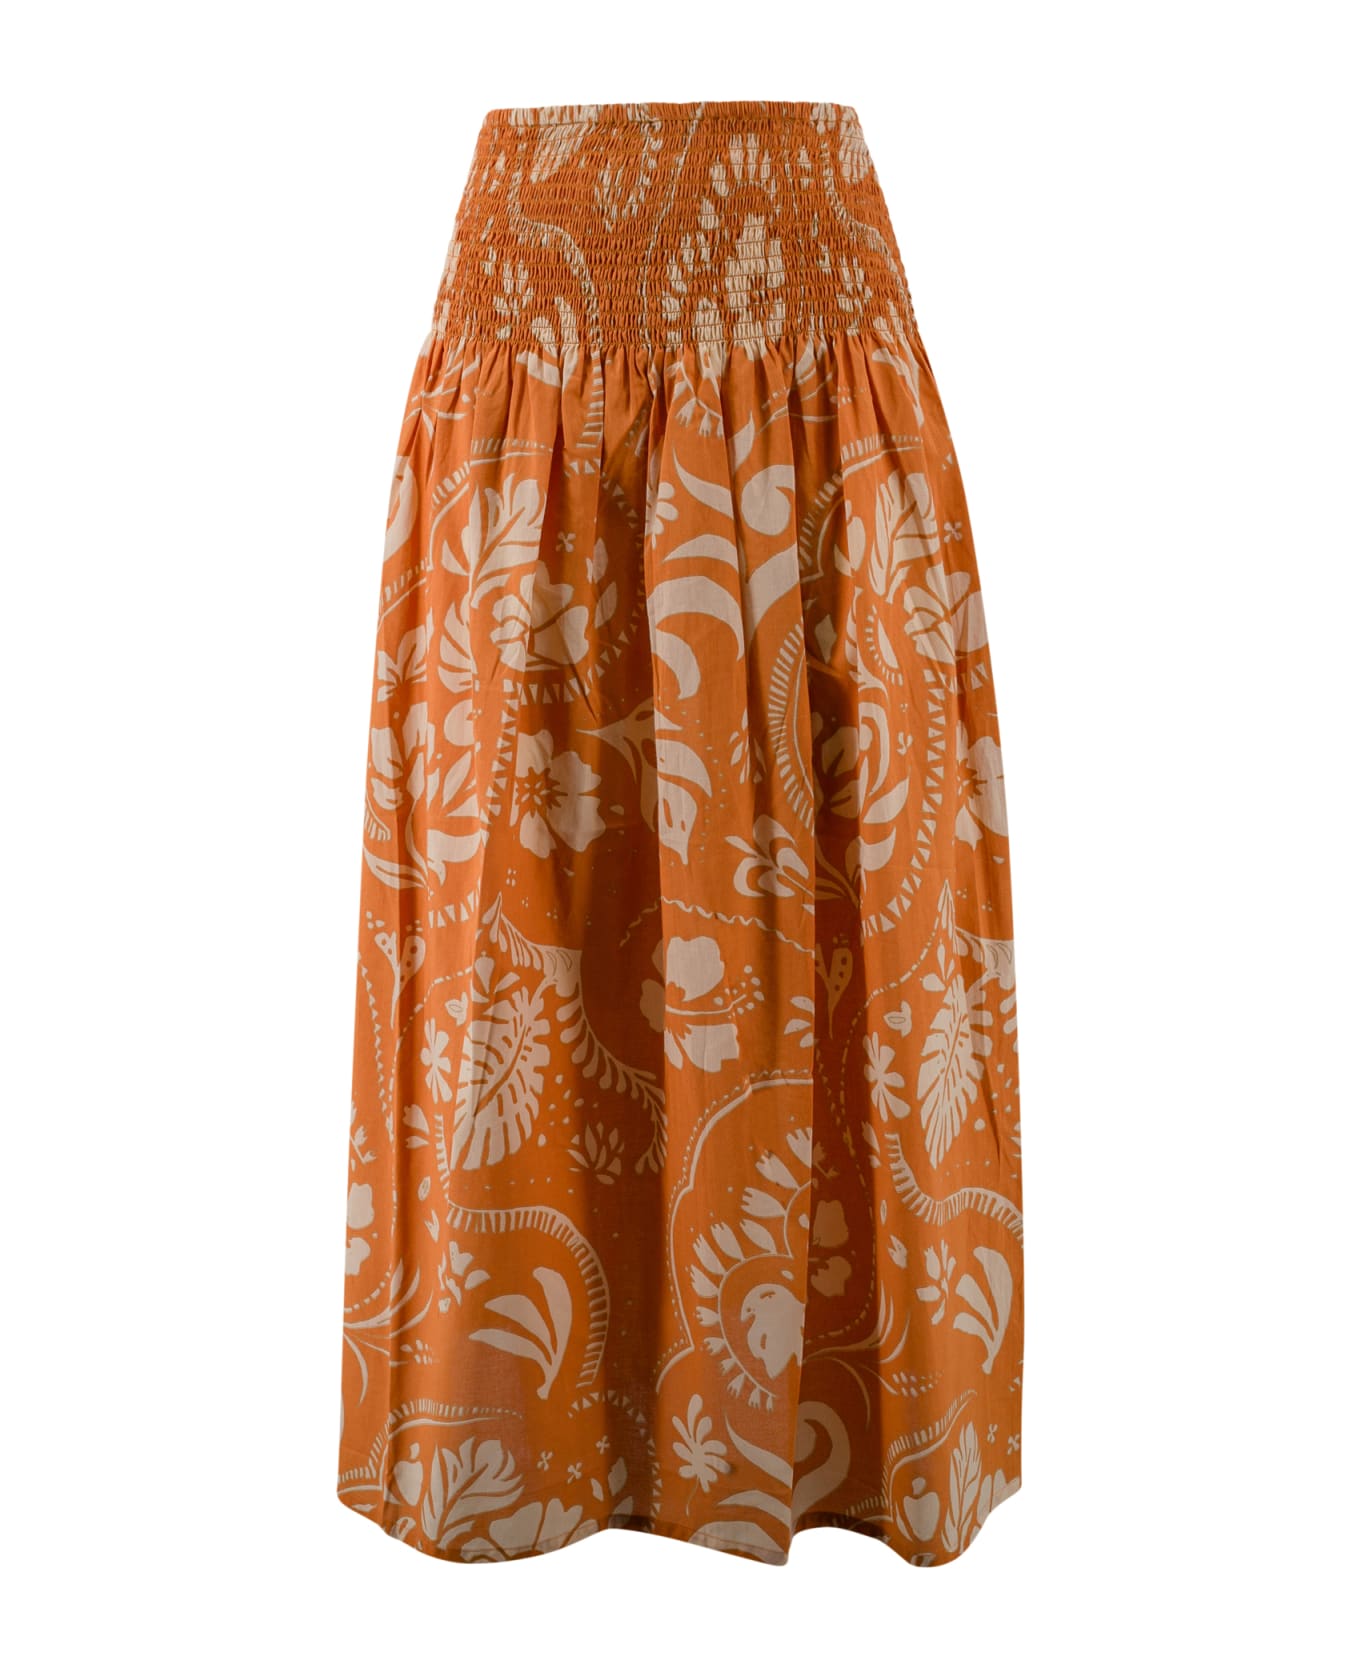 Surkana Long Skirt With Elastic Gathers At The Waist - Brown